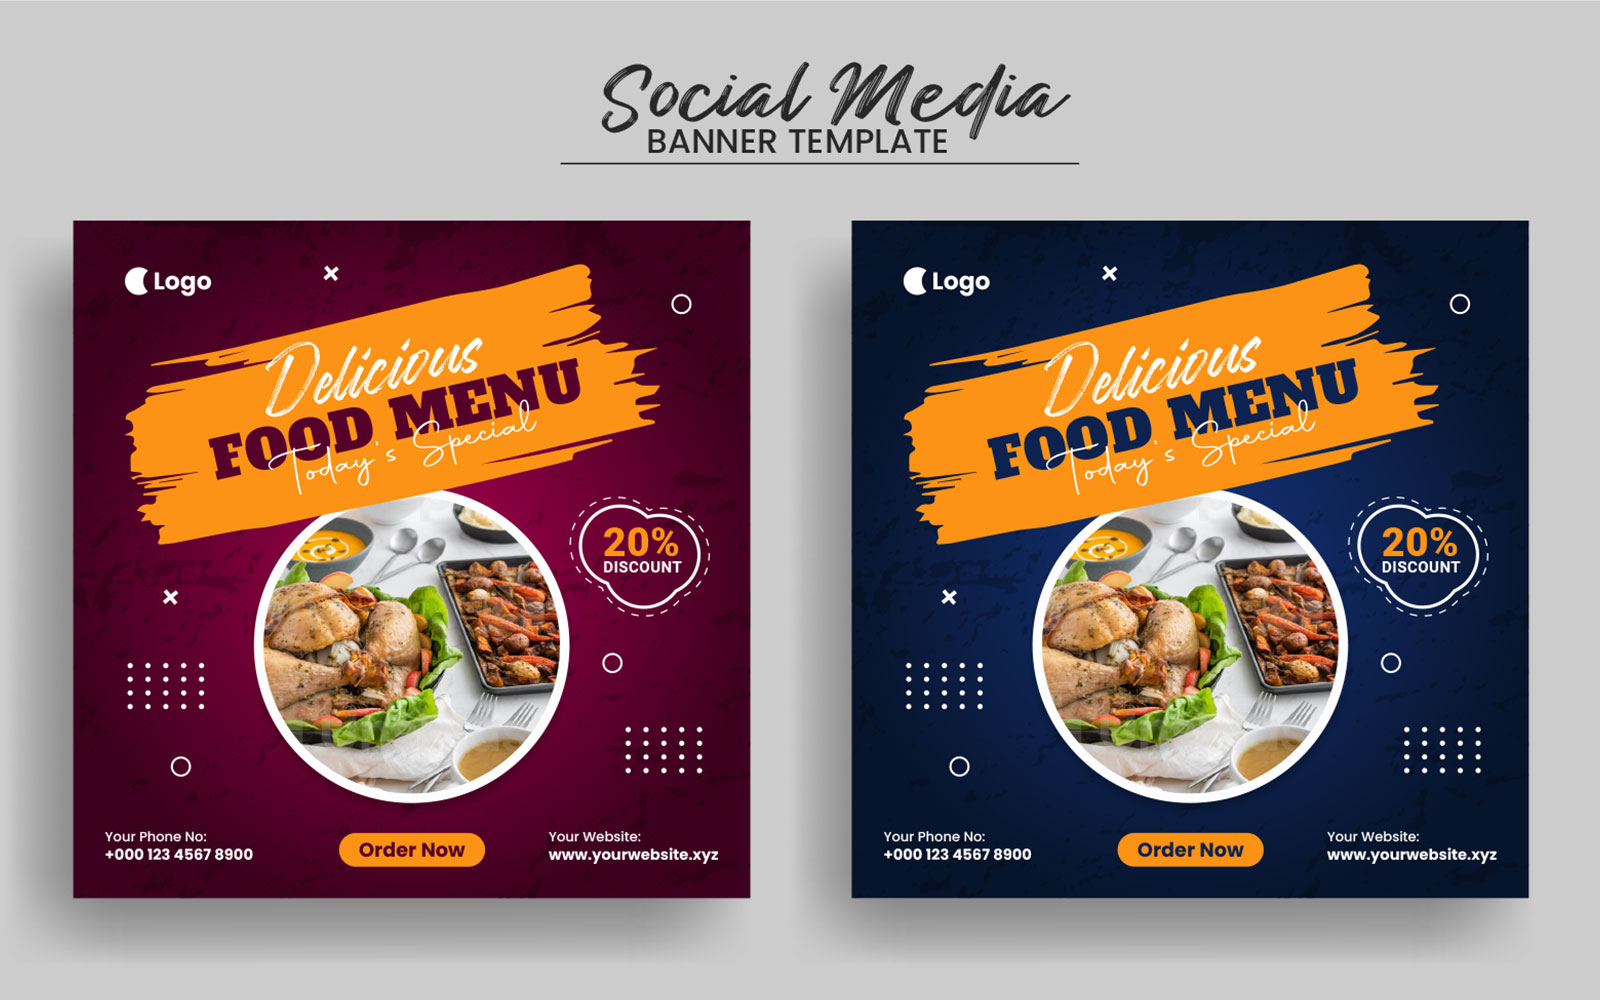 Food Menu and Restaurant Social Media Post Banner Template and Web Banner Layout